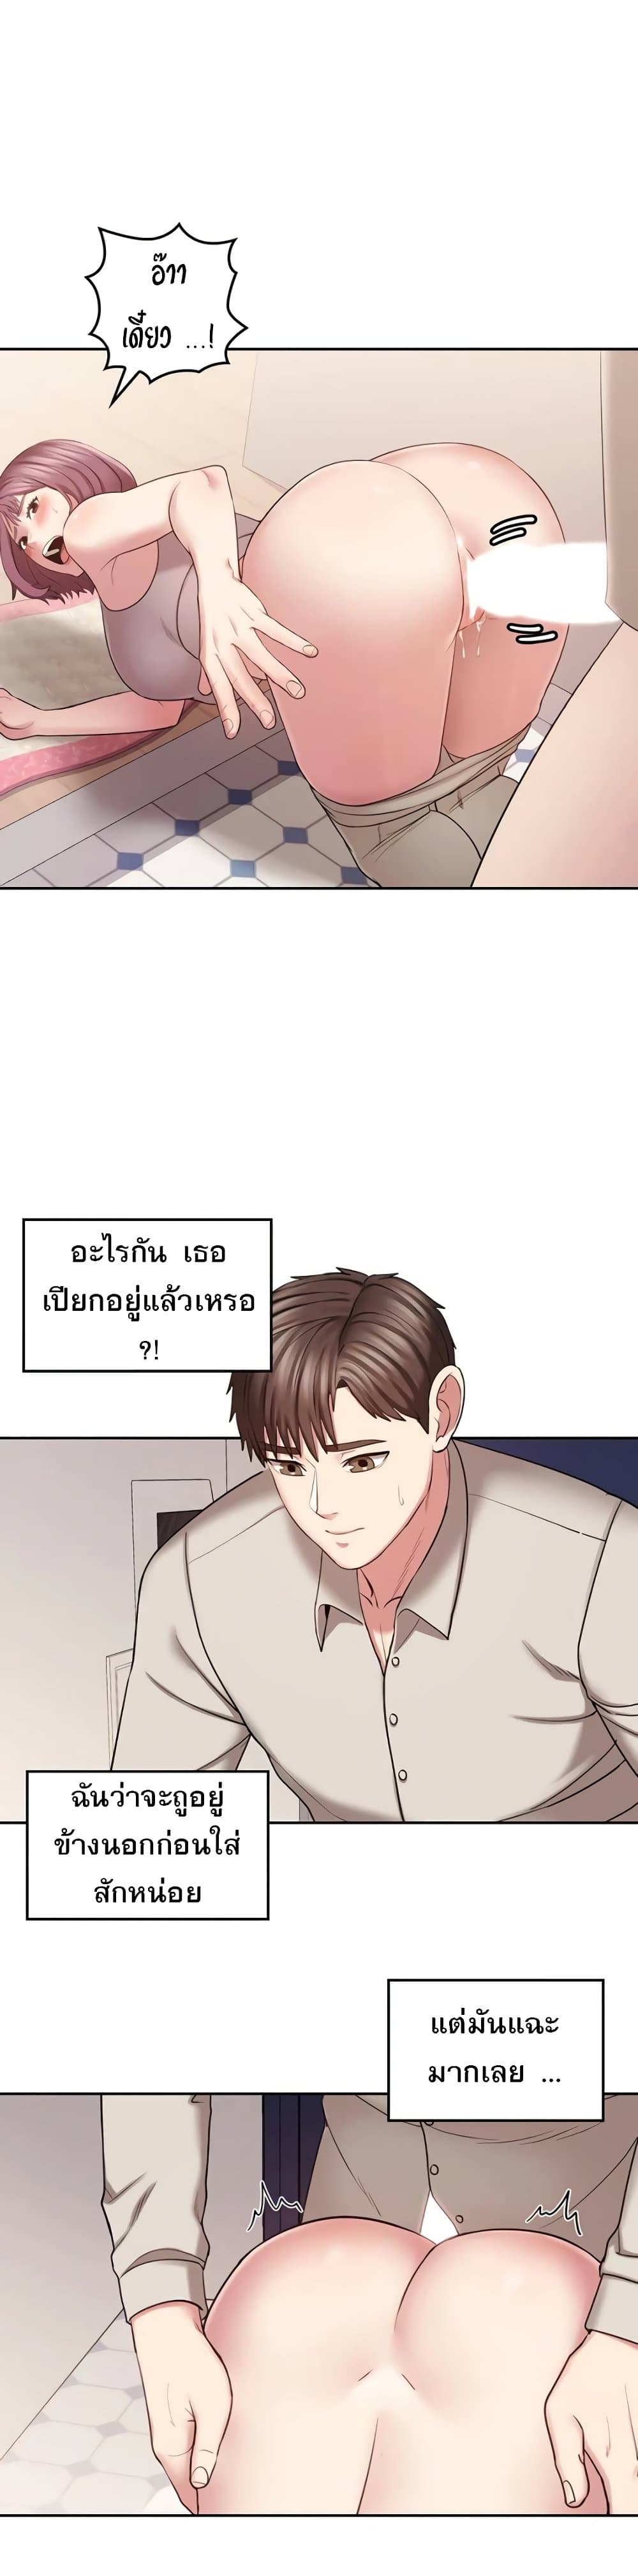 Sexual Consulting 2 ภาพที่ 29